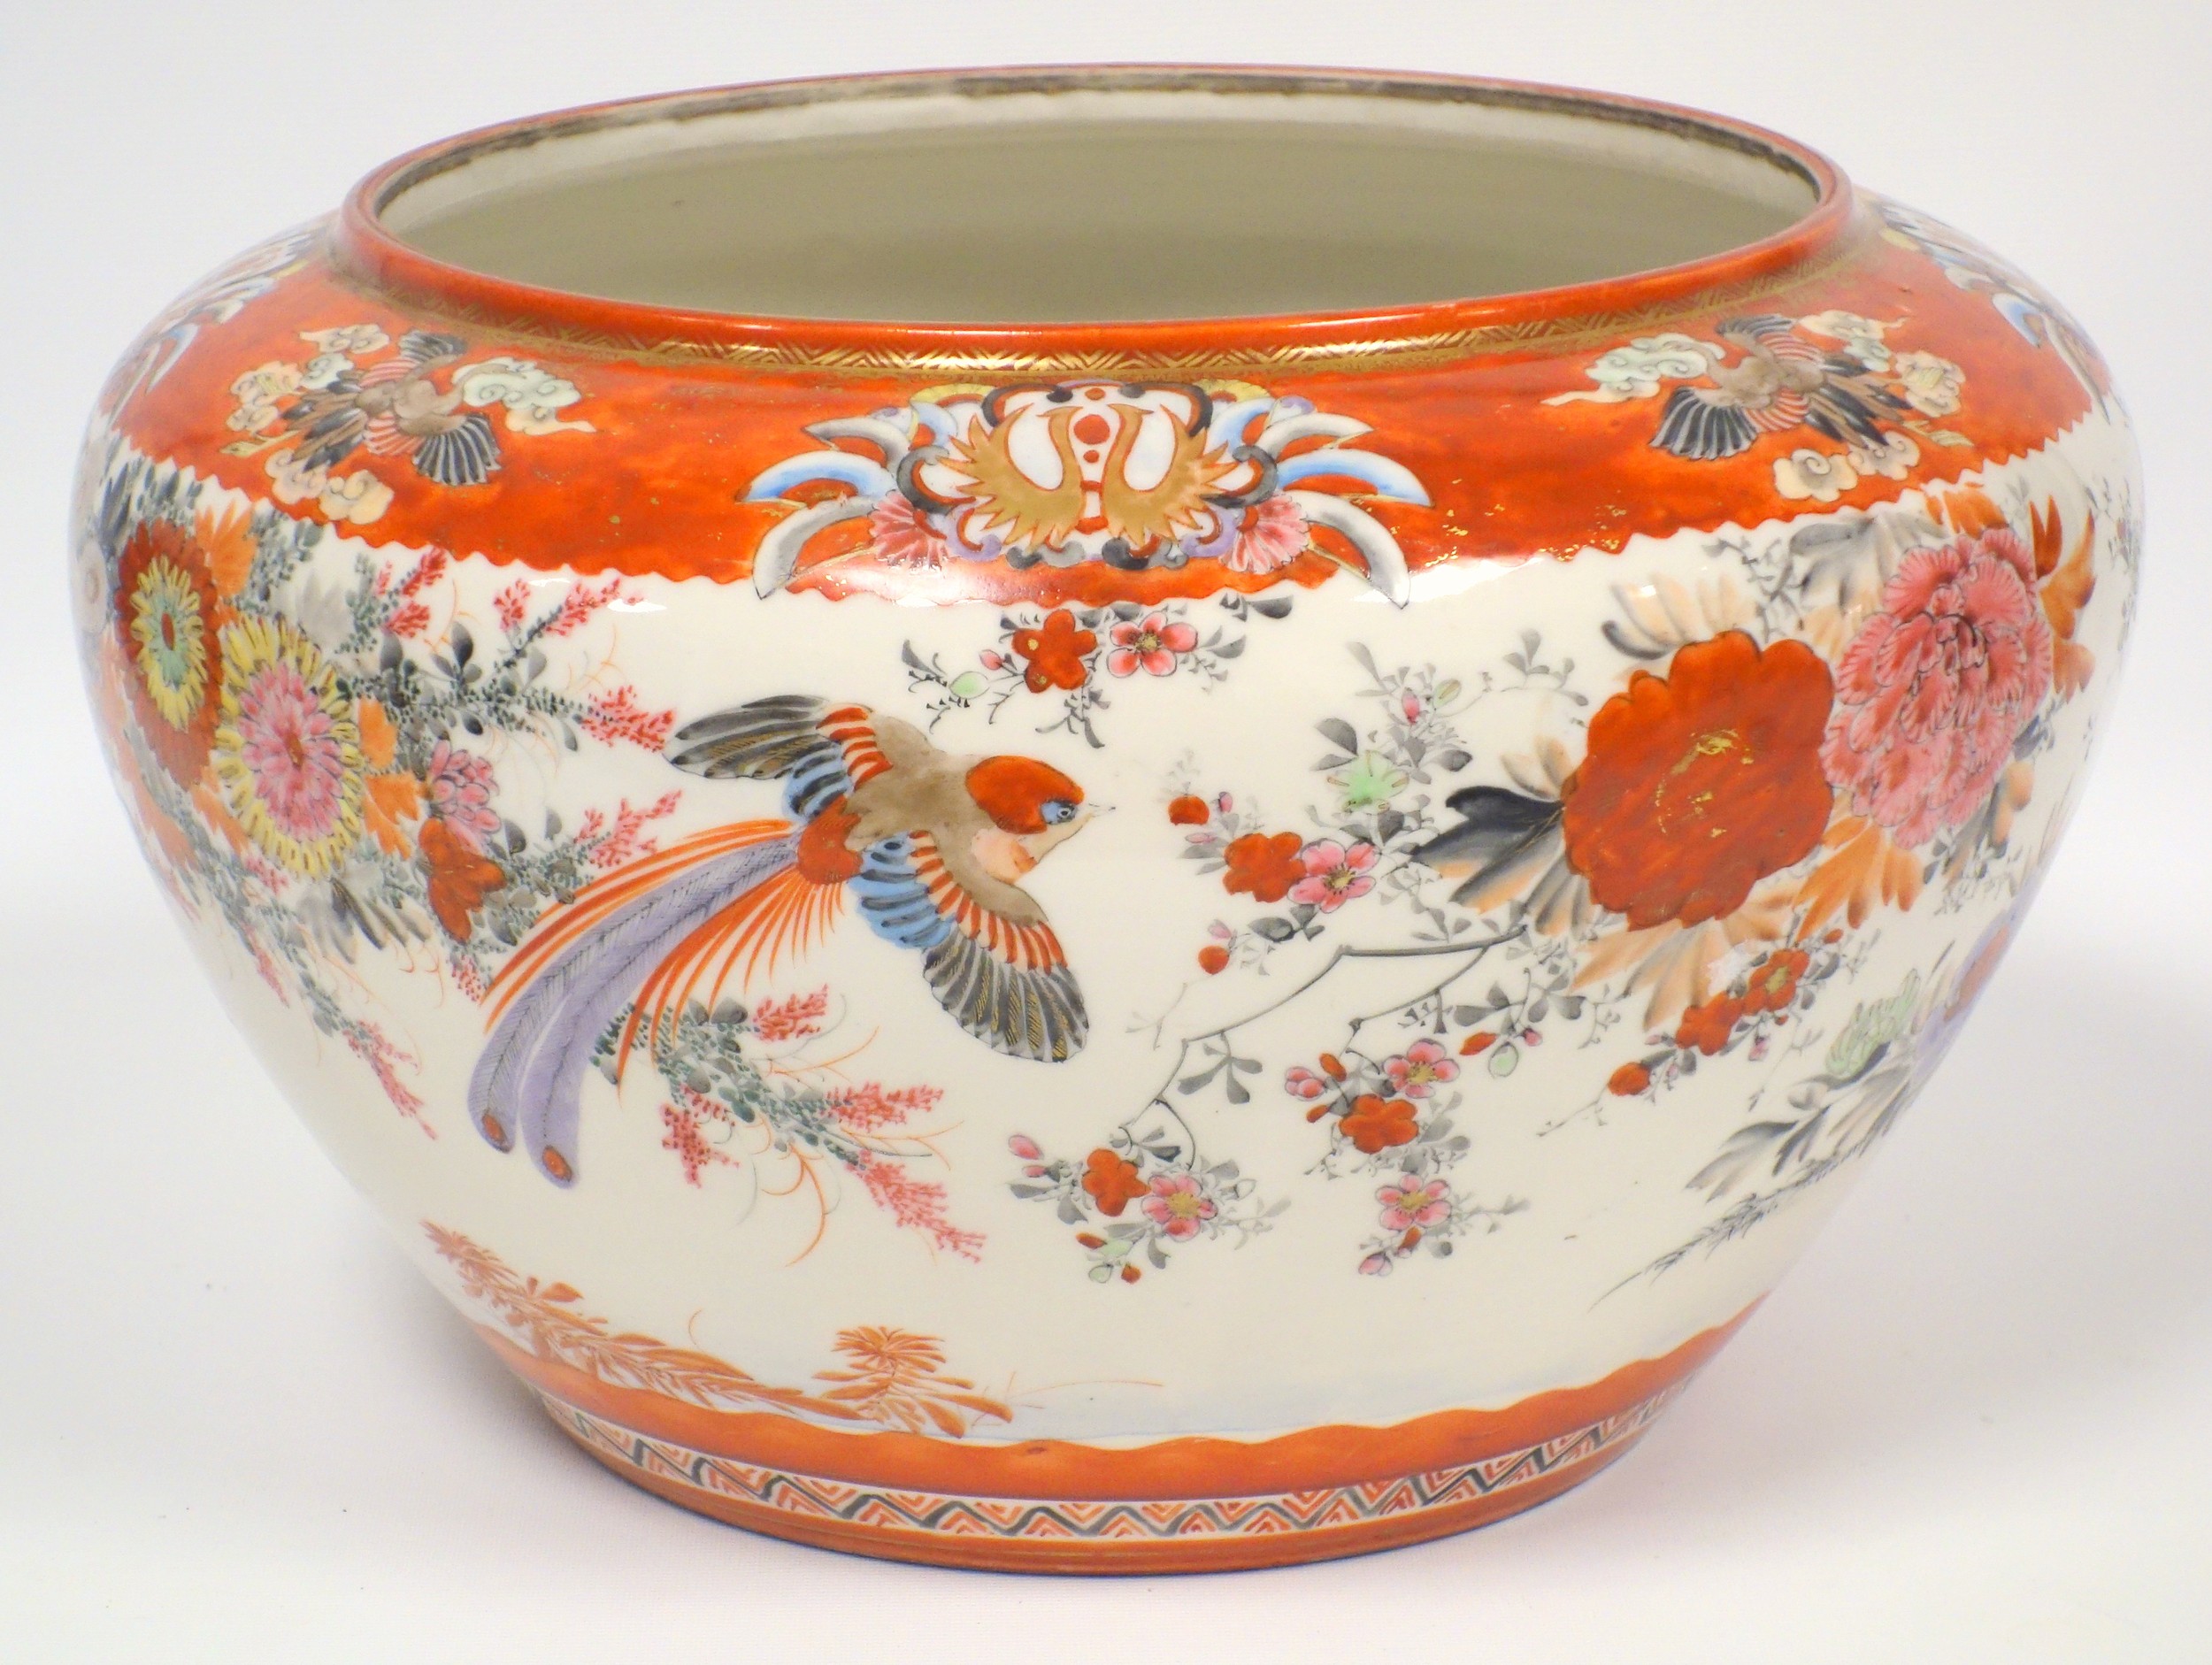 Late 19th century Japanese Kutani porcelain circular bowl painted with peacocks, other birds and - Image 4 of 7